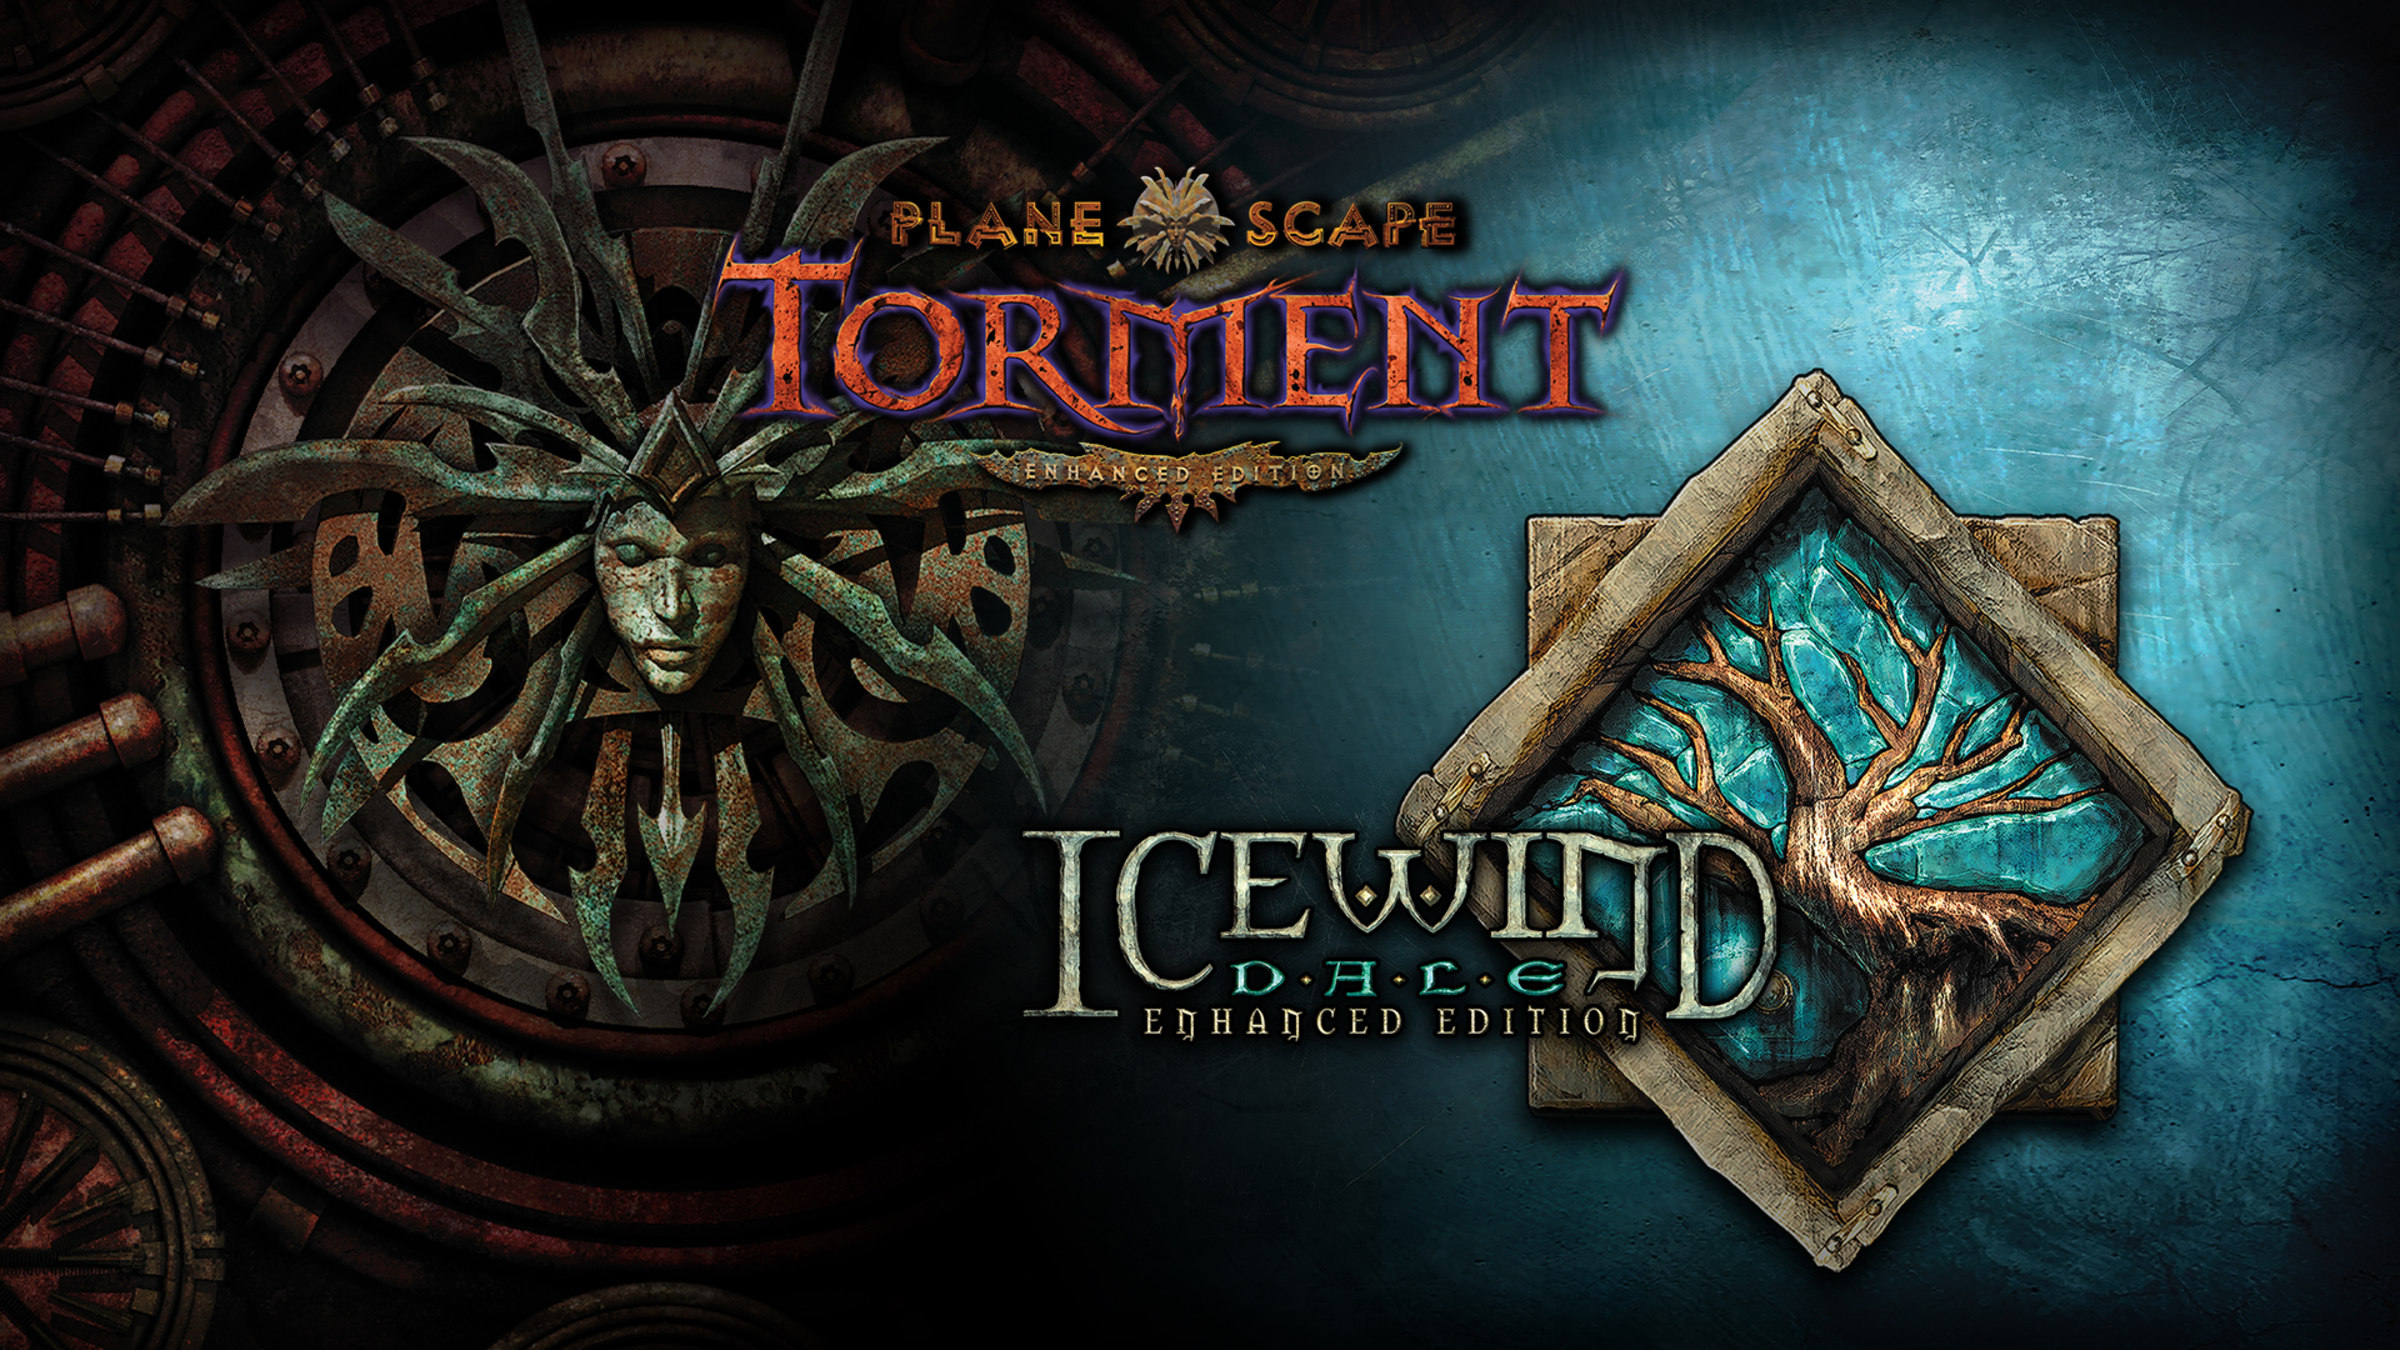 planescape-torment-and-icewind-dale-enhanced-editions-pour-nintendo-switch-site-officiel